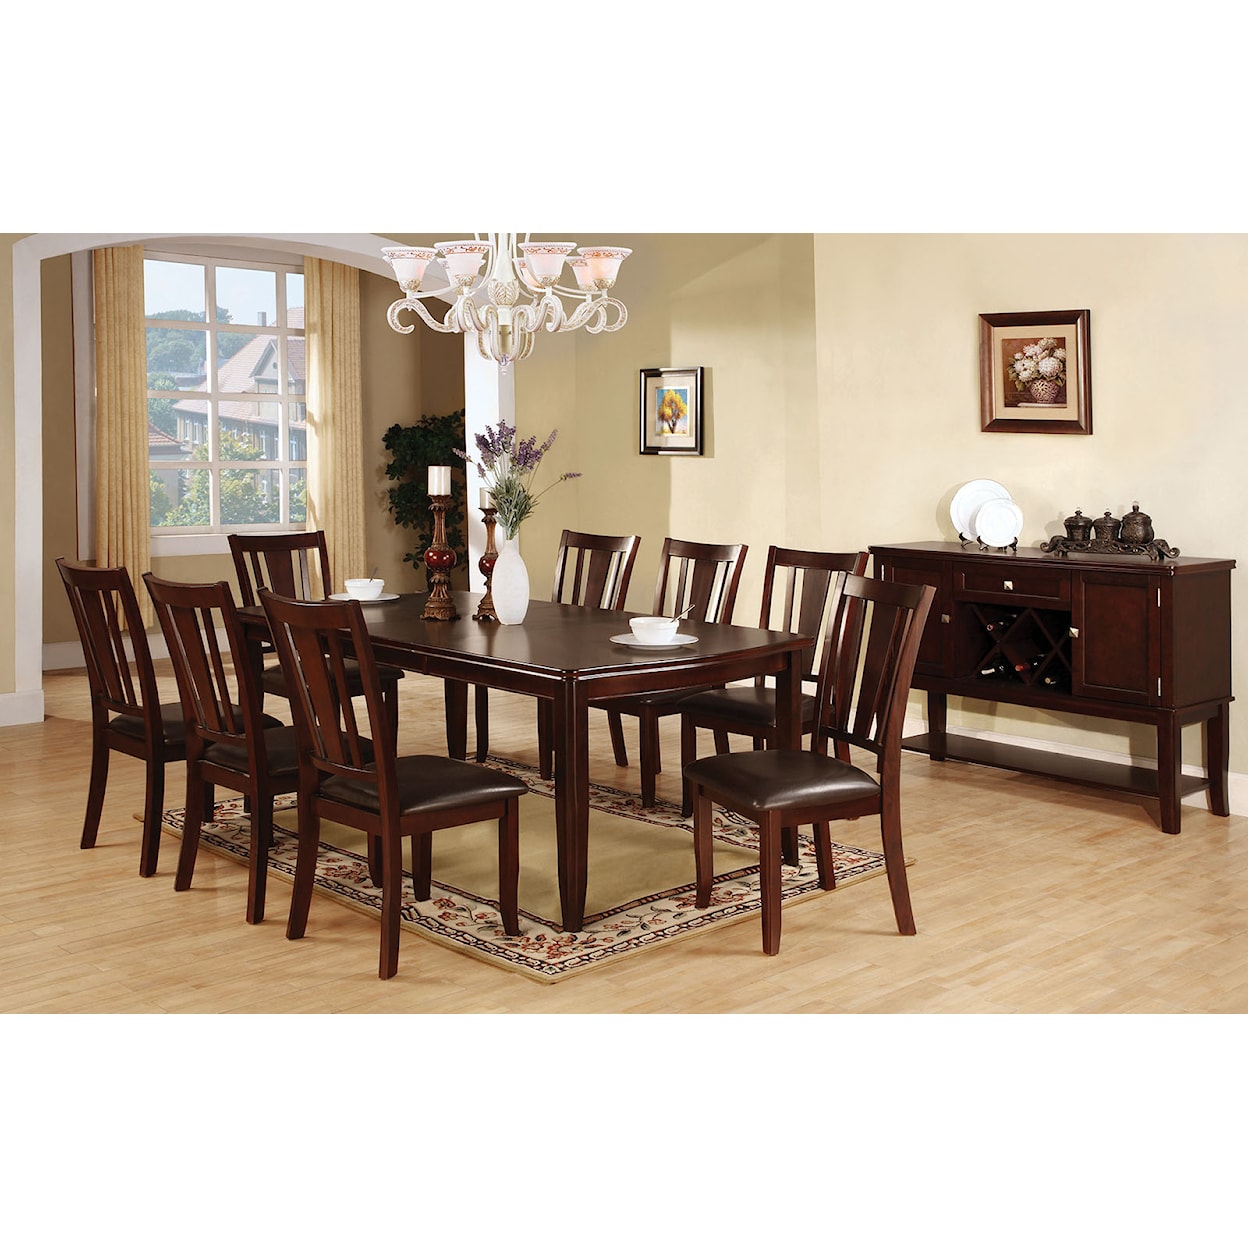 Furniture of America Edgewood 9-Piece Dining Table Set